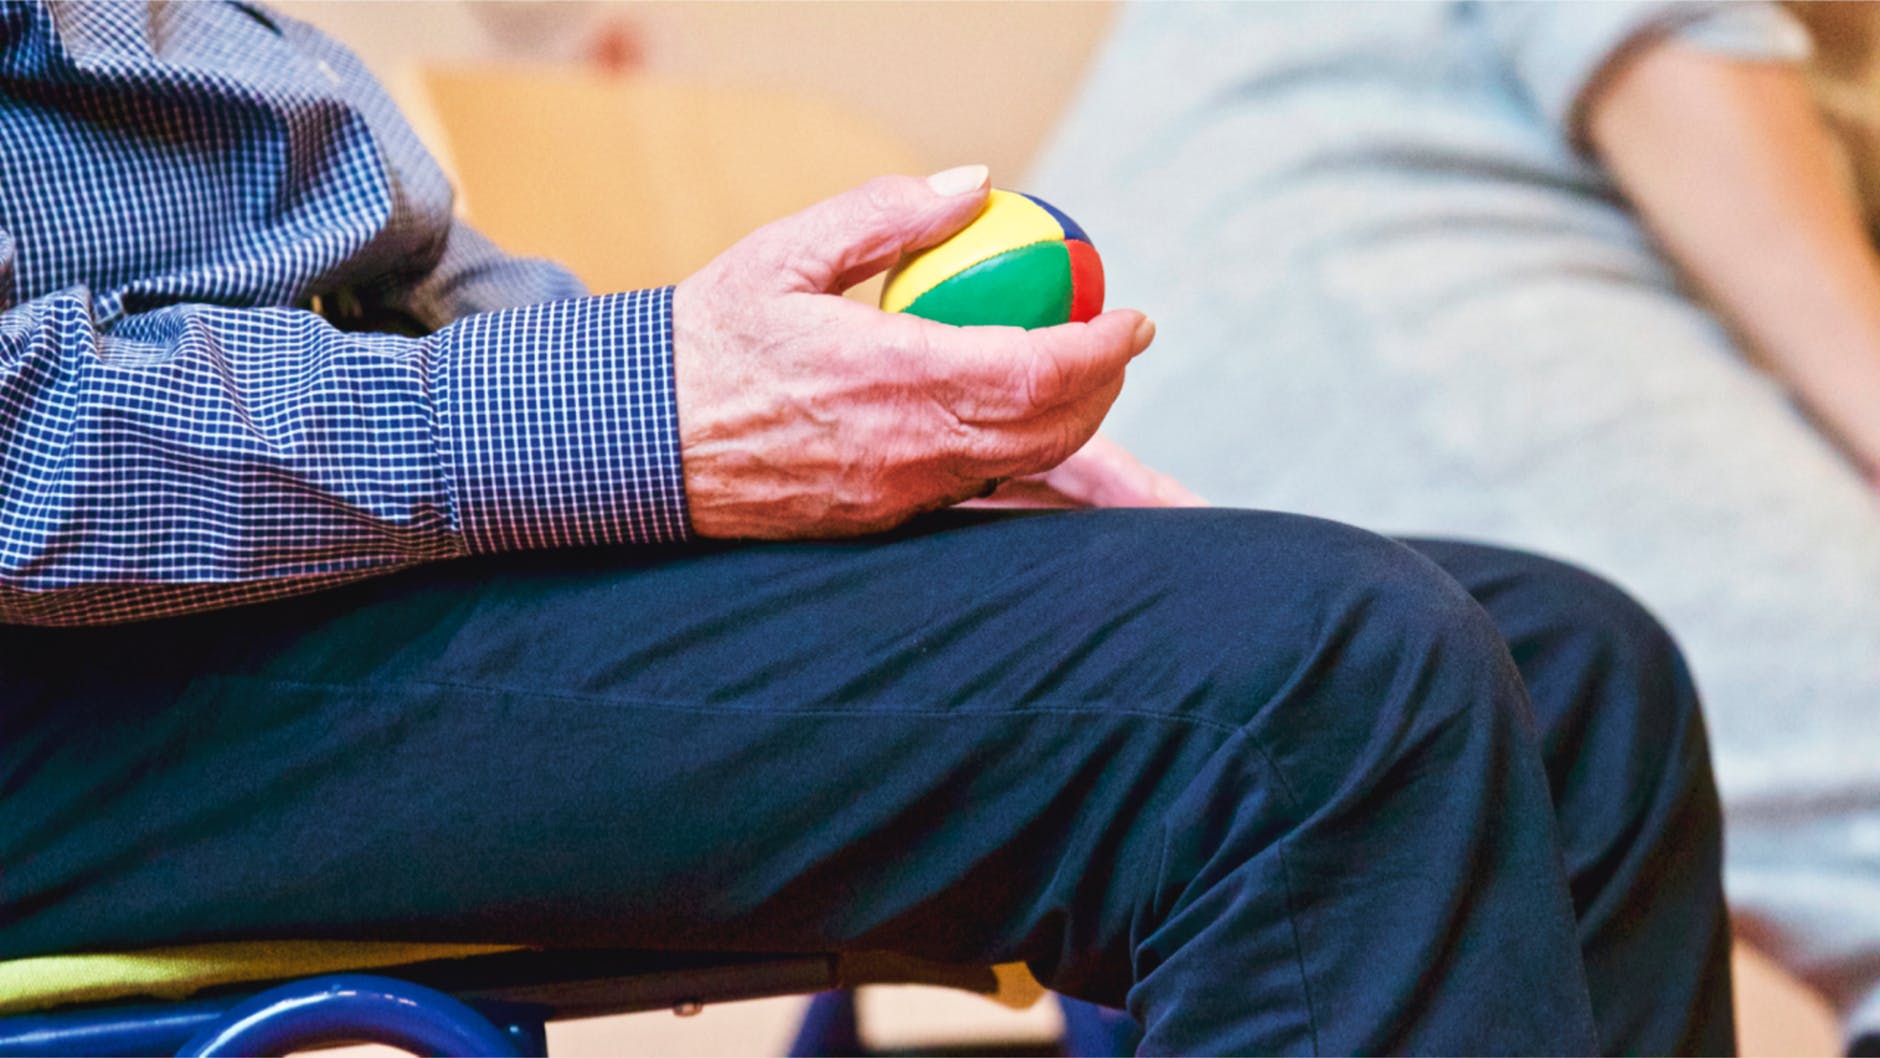 Tools that can help elderly with Parkinson’s